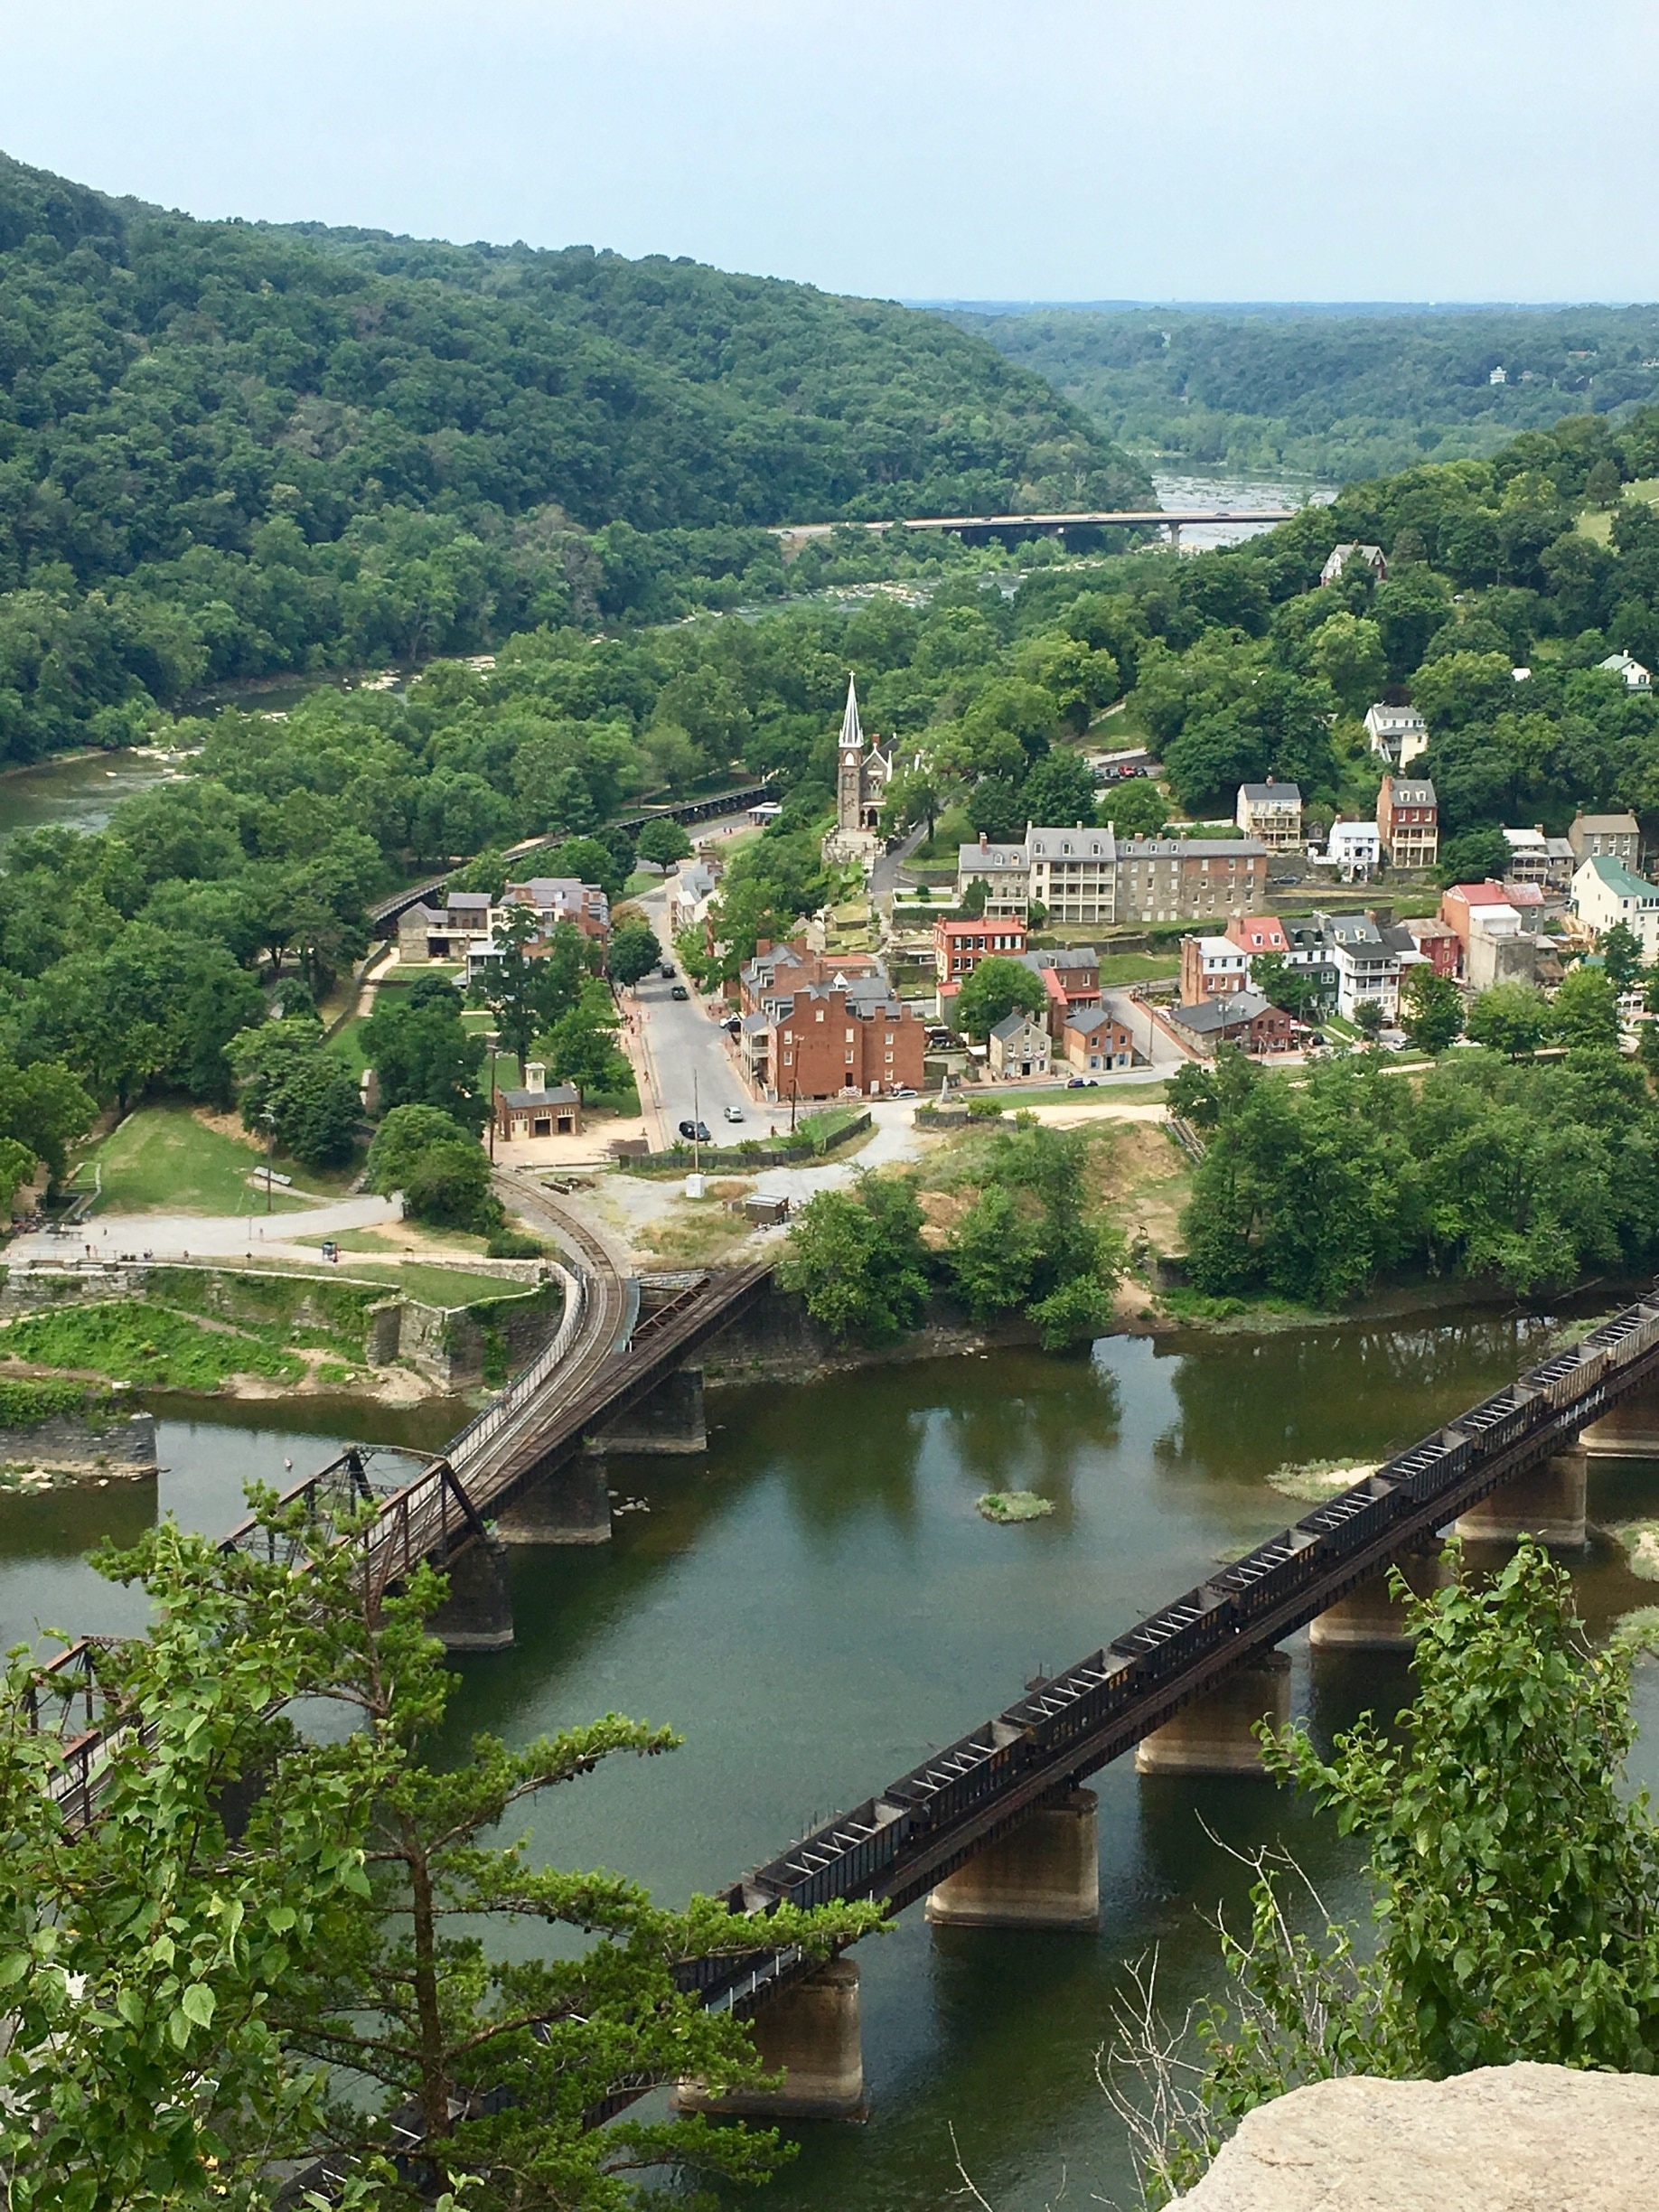 Harpers ferry is an old little town, it is so pretty and if you like to hike, it is place to go too.